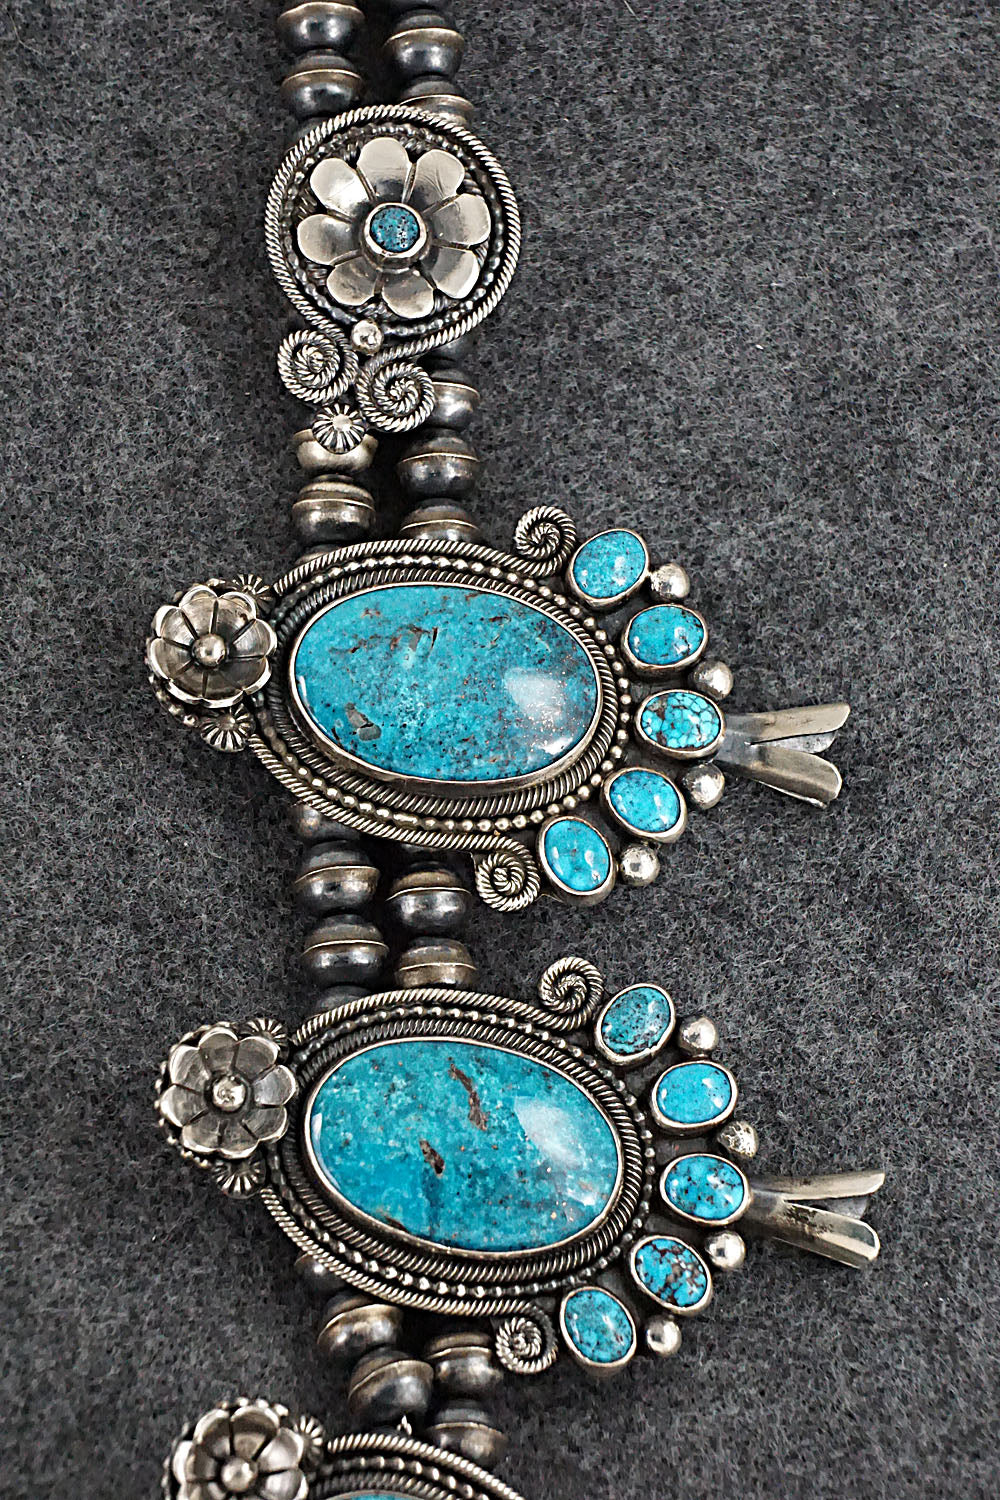 Turquoise & Sterling Silver Squash Blossom Necklace & Earrings - Myron Etsitty